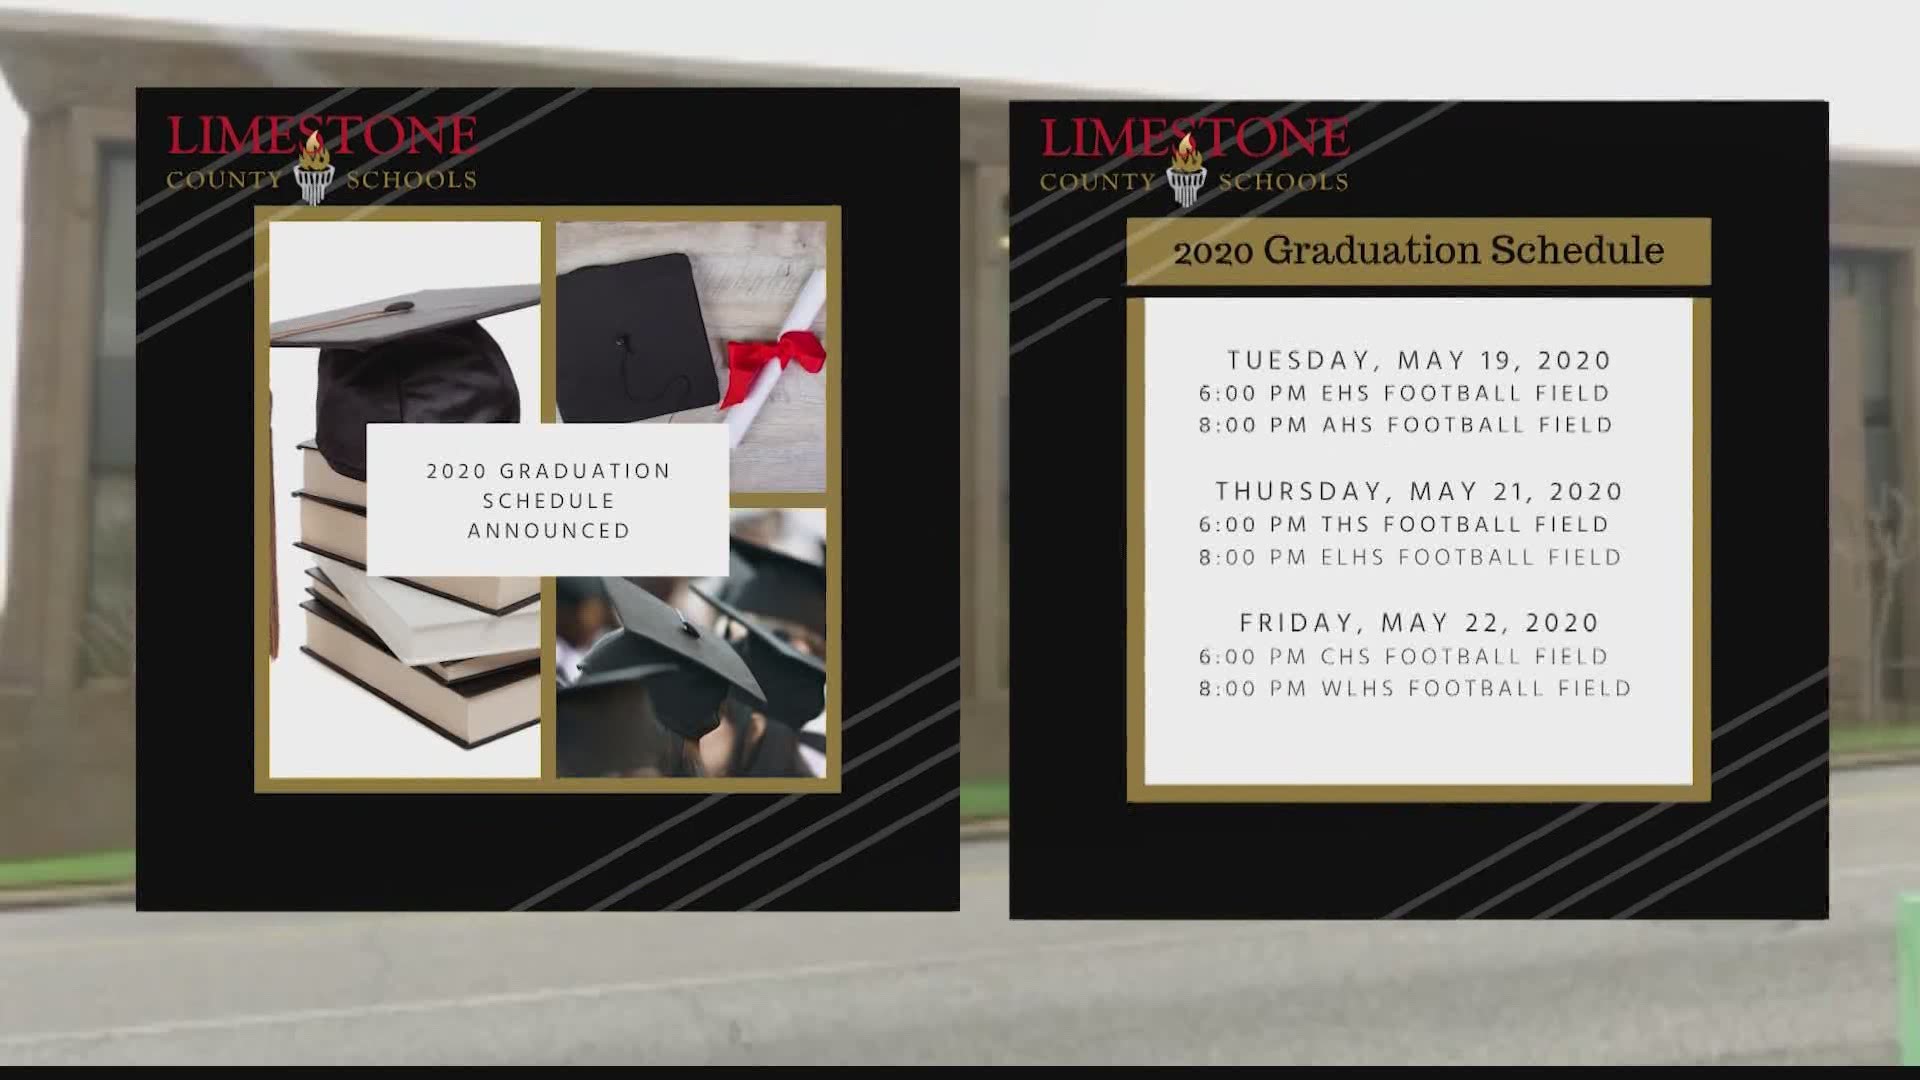 Limestone County schools will implement social distancing guidelines for graduation ceremonies on May 19th, 21st, and 22nd.